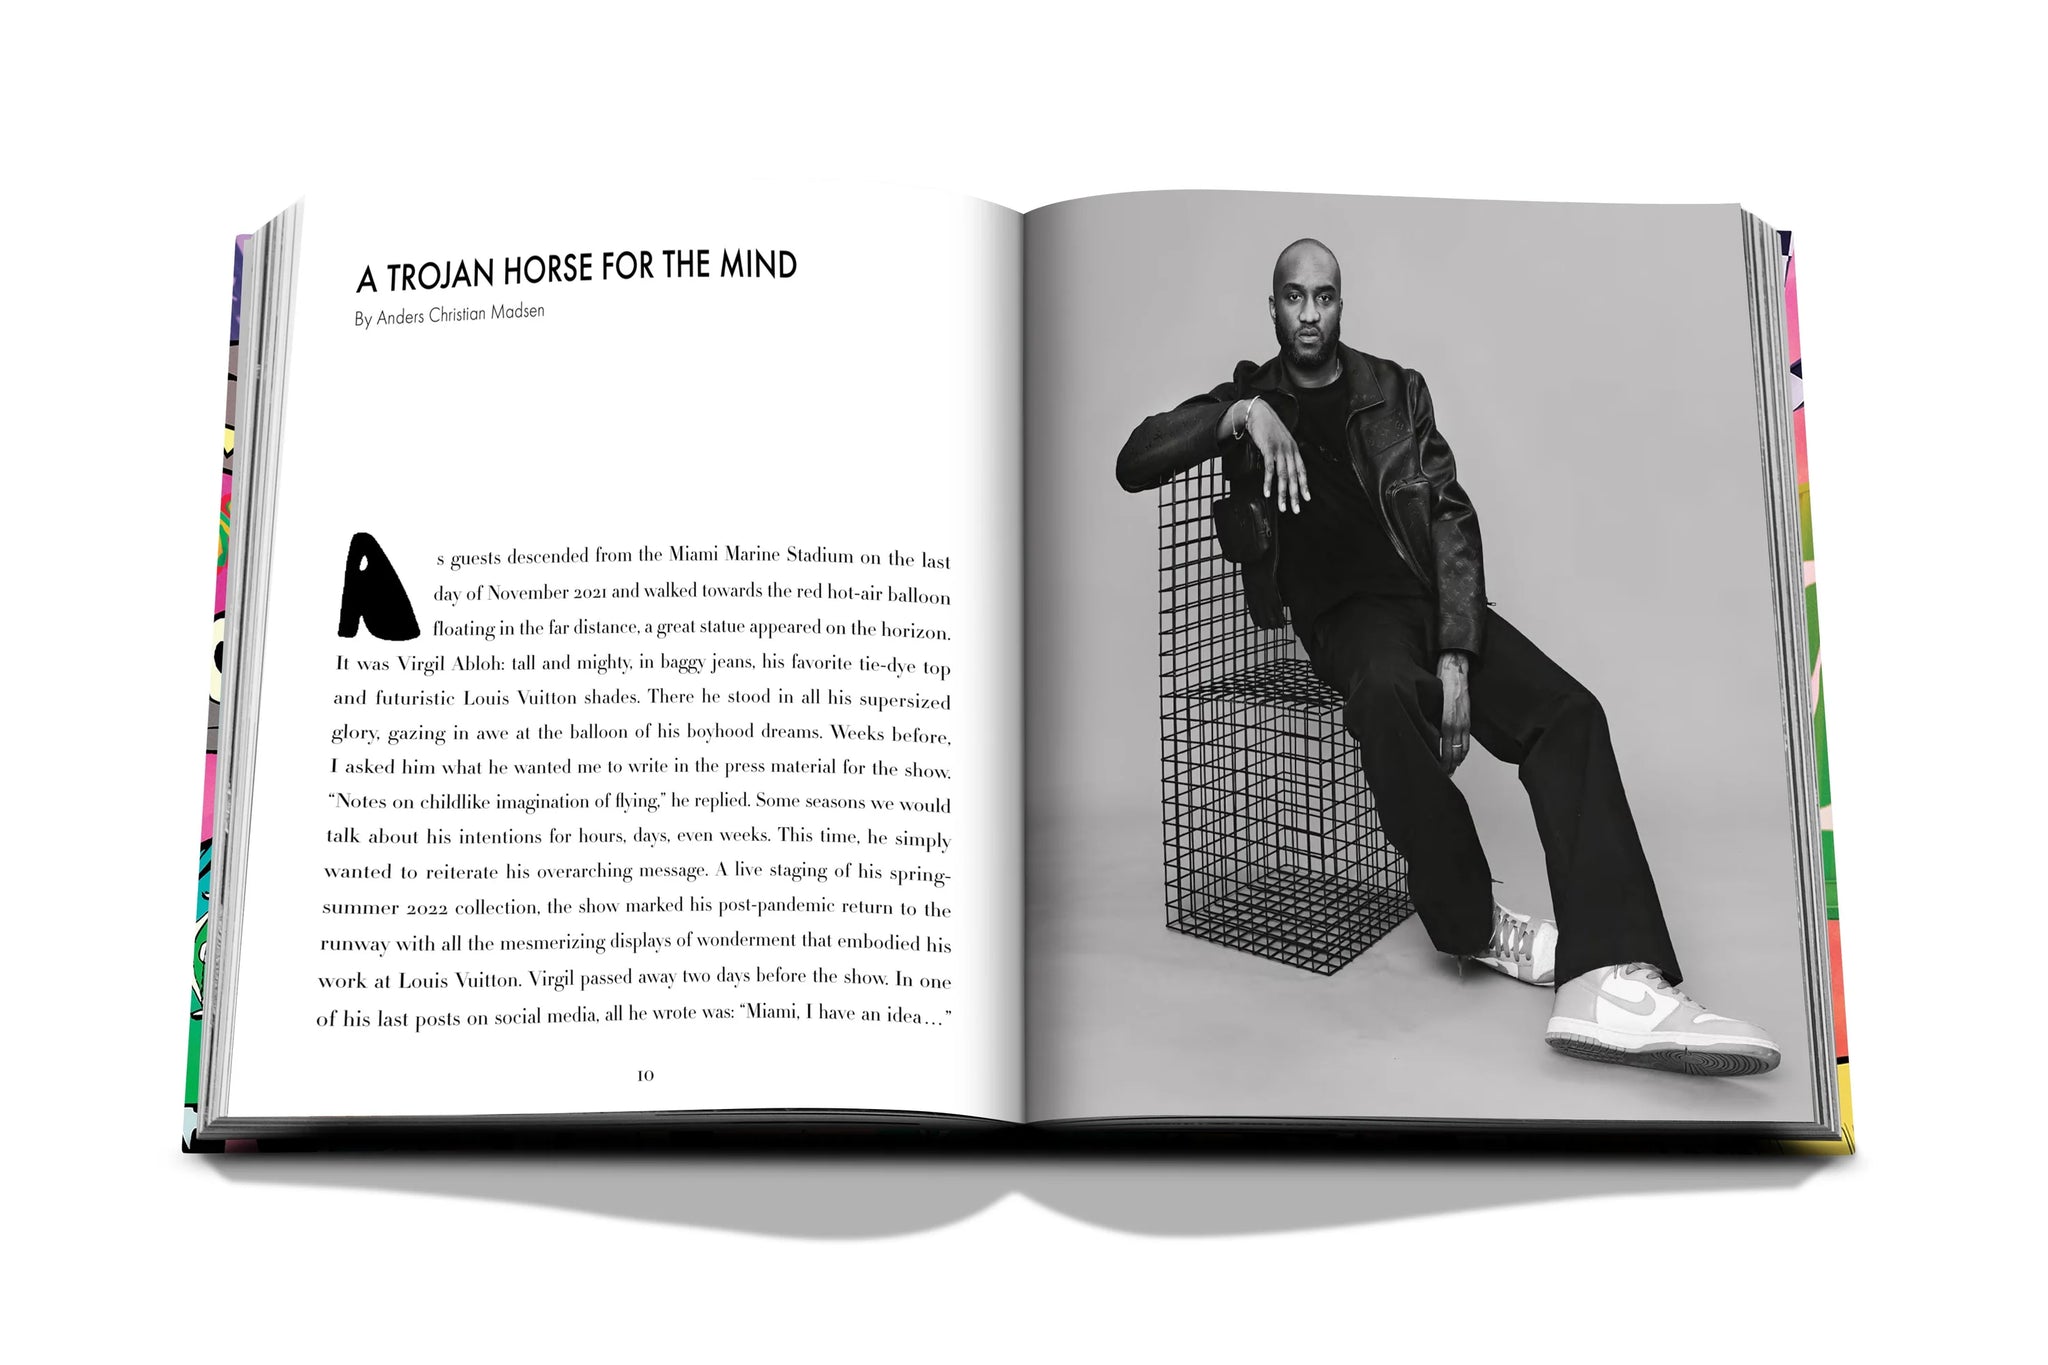 Book yourself a virtual appointment to Virgil Abloh's latest Louis